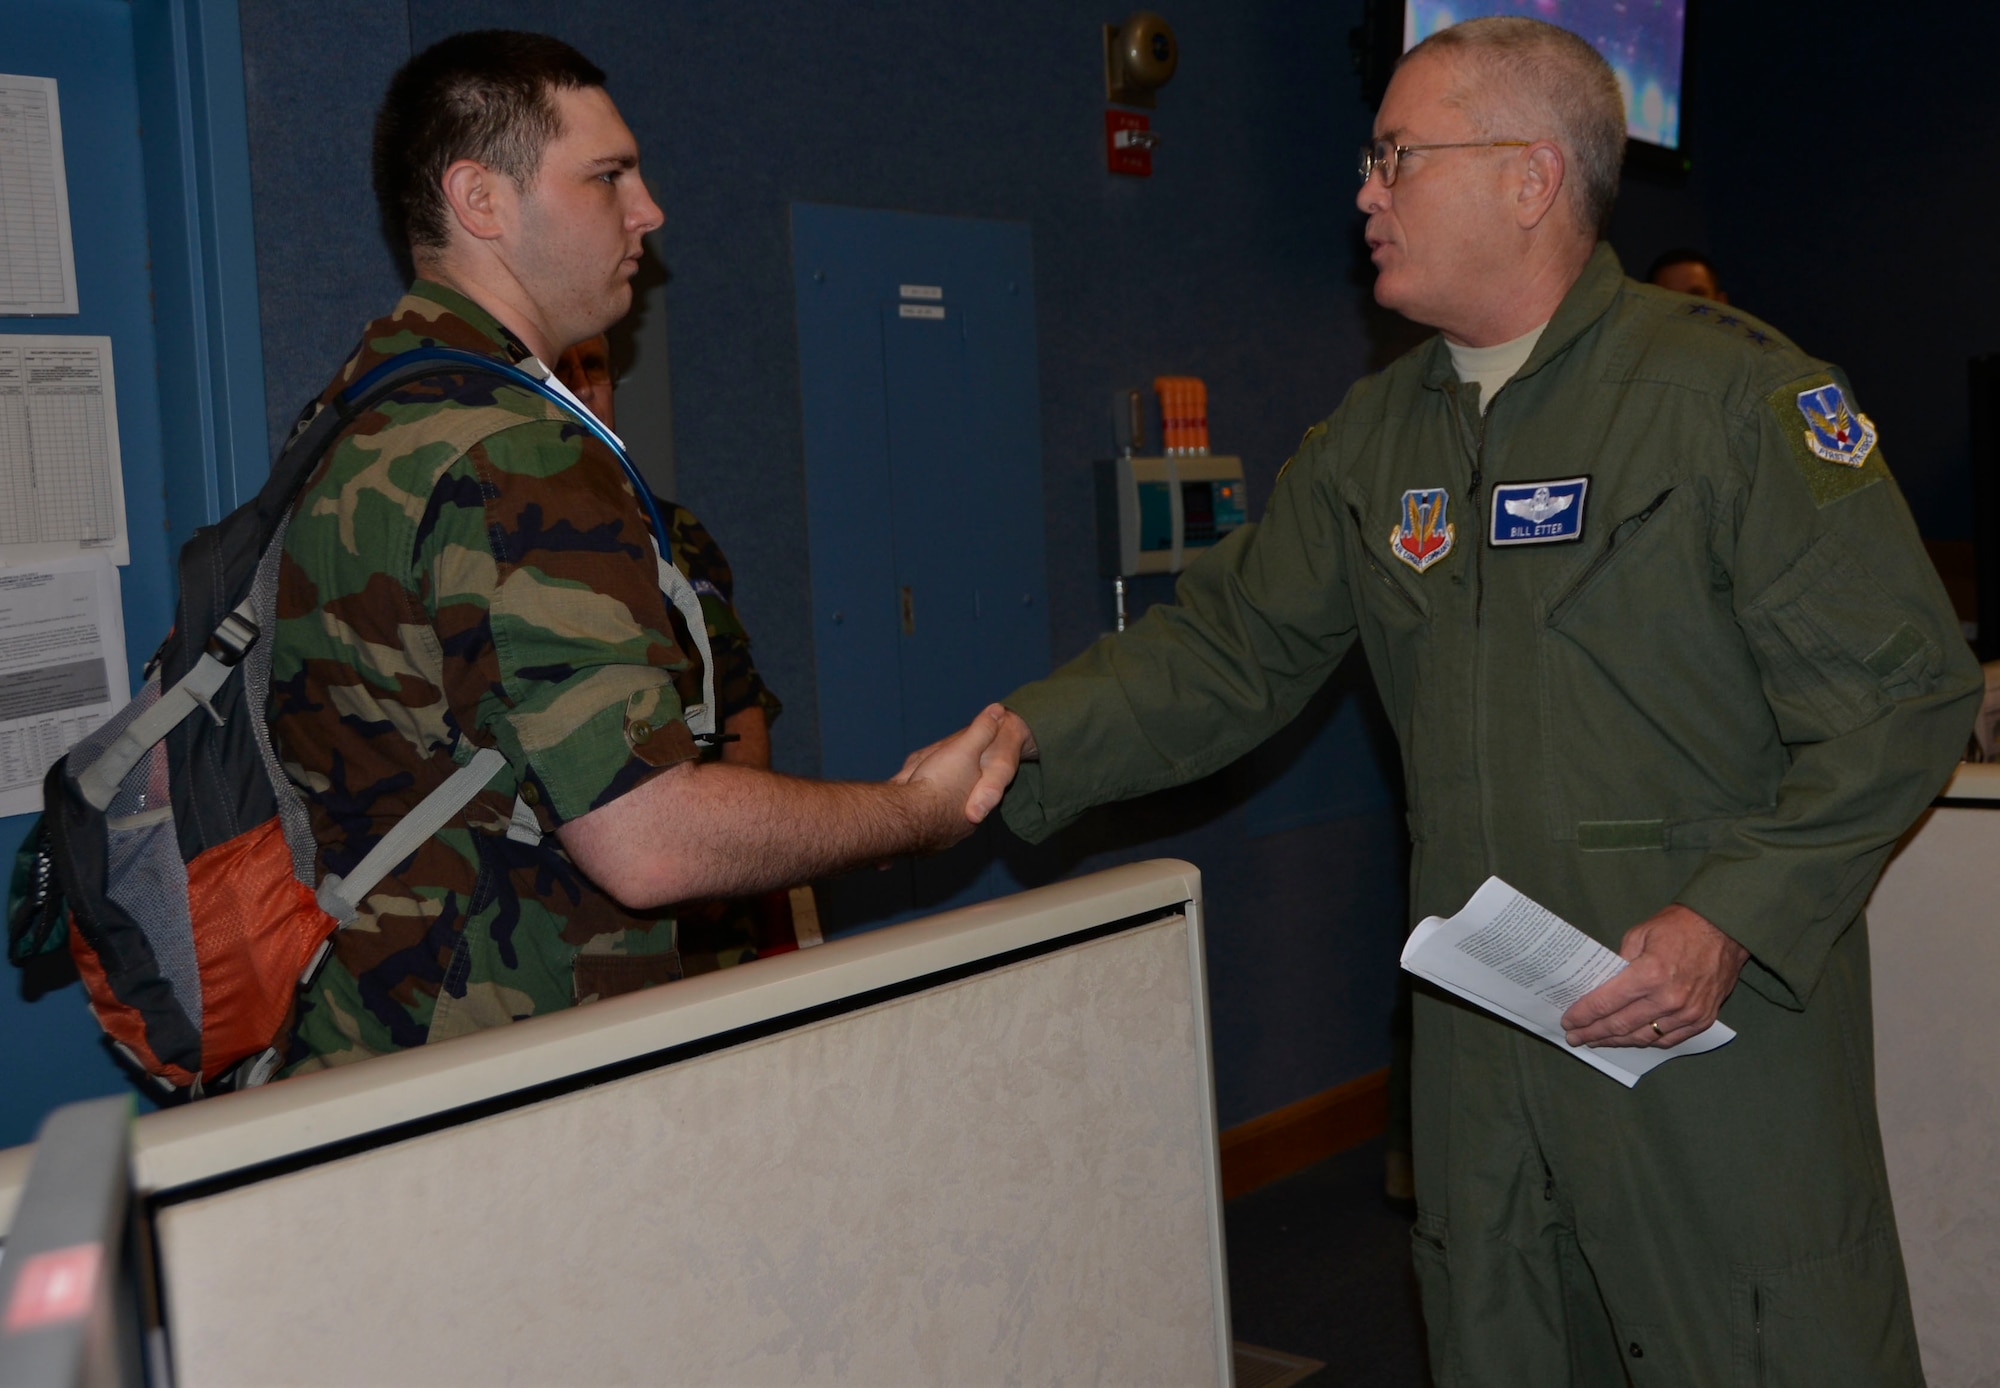 TYNDALL AIR FORCE BASE, Fla. - Lt. Gen. William Etter, Continental  U.S. North American Aerospace Defense Command Region – 1st Air Force (Air Forces Northern) commander, presents his commander’s coin for recognition of superior performance  to Civil Air Patrol Cadet/2d Lieutenant  Steven Conway of Lake Composite Squadron Fl-021 during a CAP cadet tour of the 601st Air Operations Center Wednesday. Conway is a CAP Silver Medal of Honor recipient who distinguished himself when, during a visit to a local store, he rushed to a store worker under attack by a man wielding a knife. He pulled the man off the worker and is credited by police for probably saving the woman’s life. The attacker fled but was subsequently captured by authorities shortly thereafter. Conway and the other cadets were visiting the 601st AOC as part of their annual week-long winter encampment event designed provide an in-depth orientation to the Civil Air Patrol and the United States Air Force. (Air Force Photo Released/Mary McHale)


